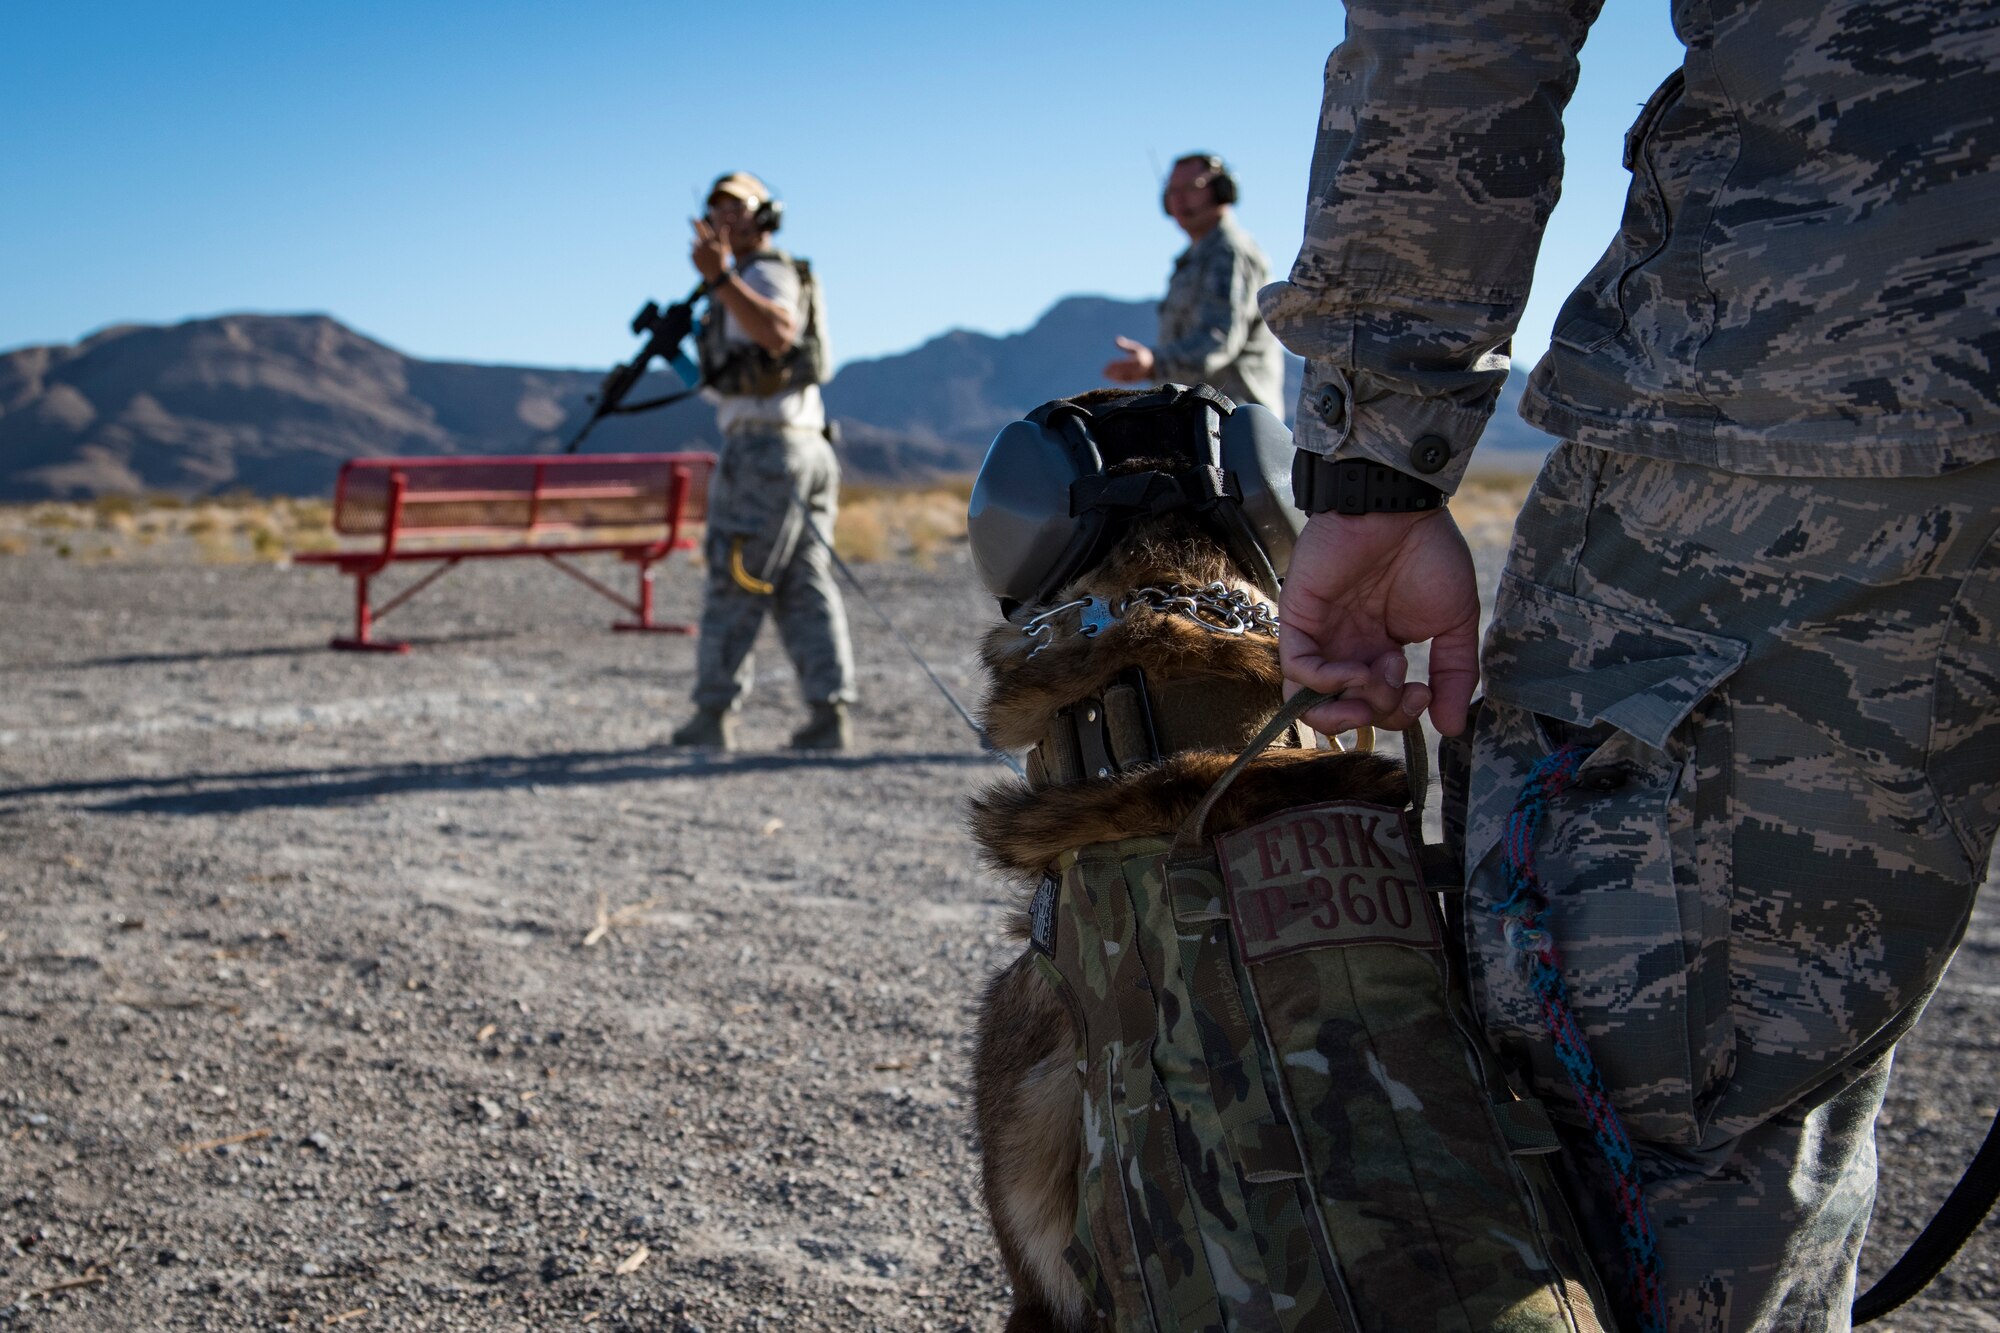 Staff Sgt. Juan Hinojosa, 99th Security Forces Squadron military working dog handler, gives a command to Erik, his military working dog, at Nellis Air Force Base, Nevada, Sept. 19, 2018. The live-fire training allowed the military working dogs to work on their combat familiarization. (U.S. Air Force photo by Airman 1st Class Andrew D. Sarver)